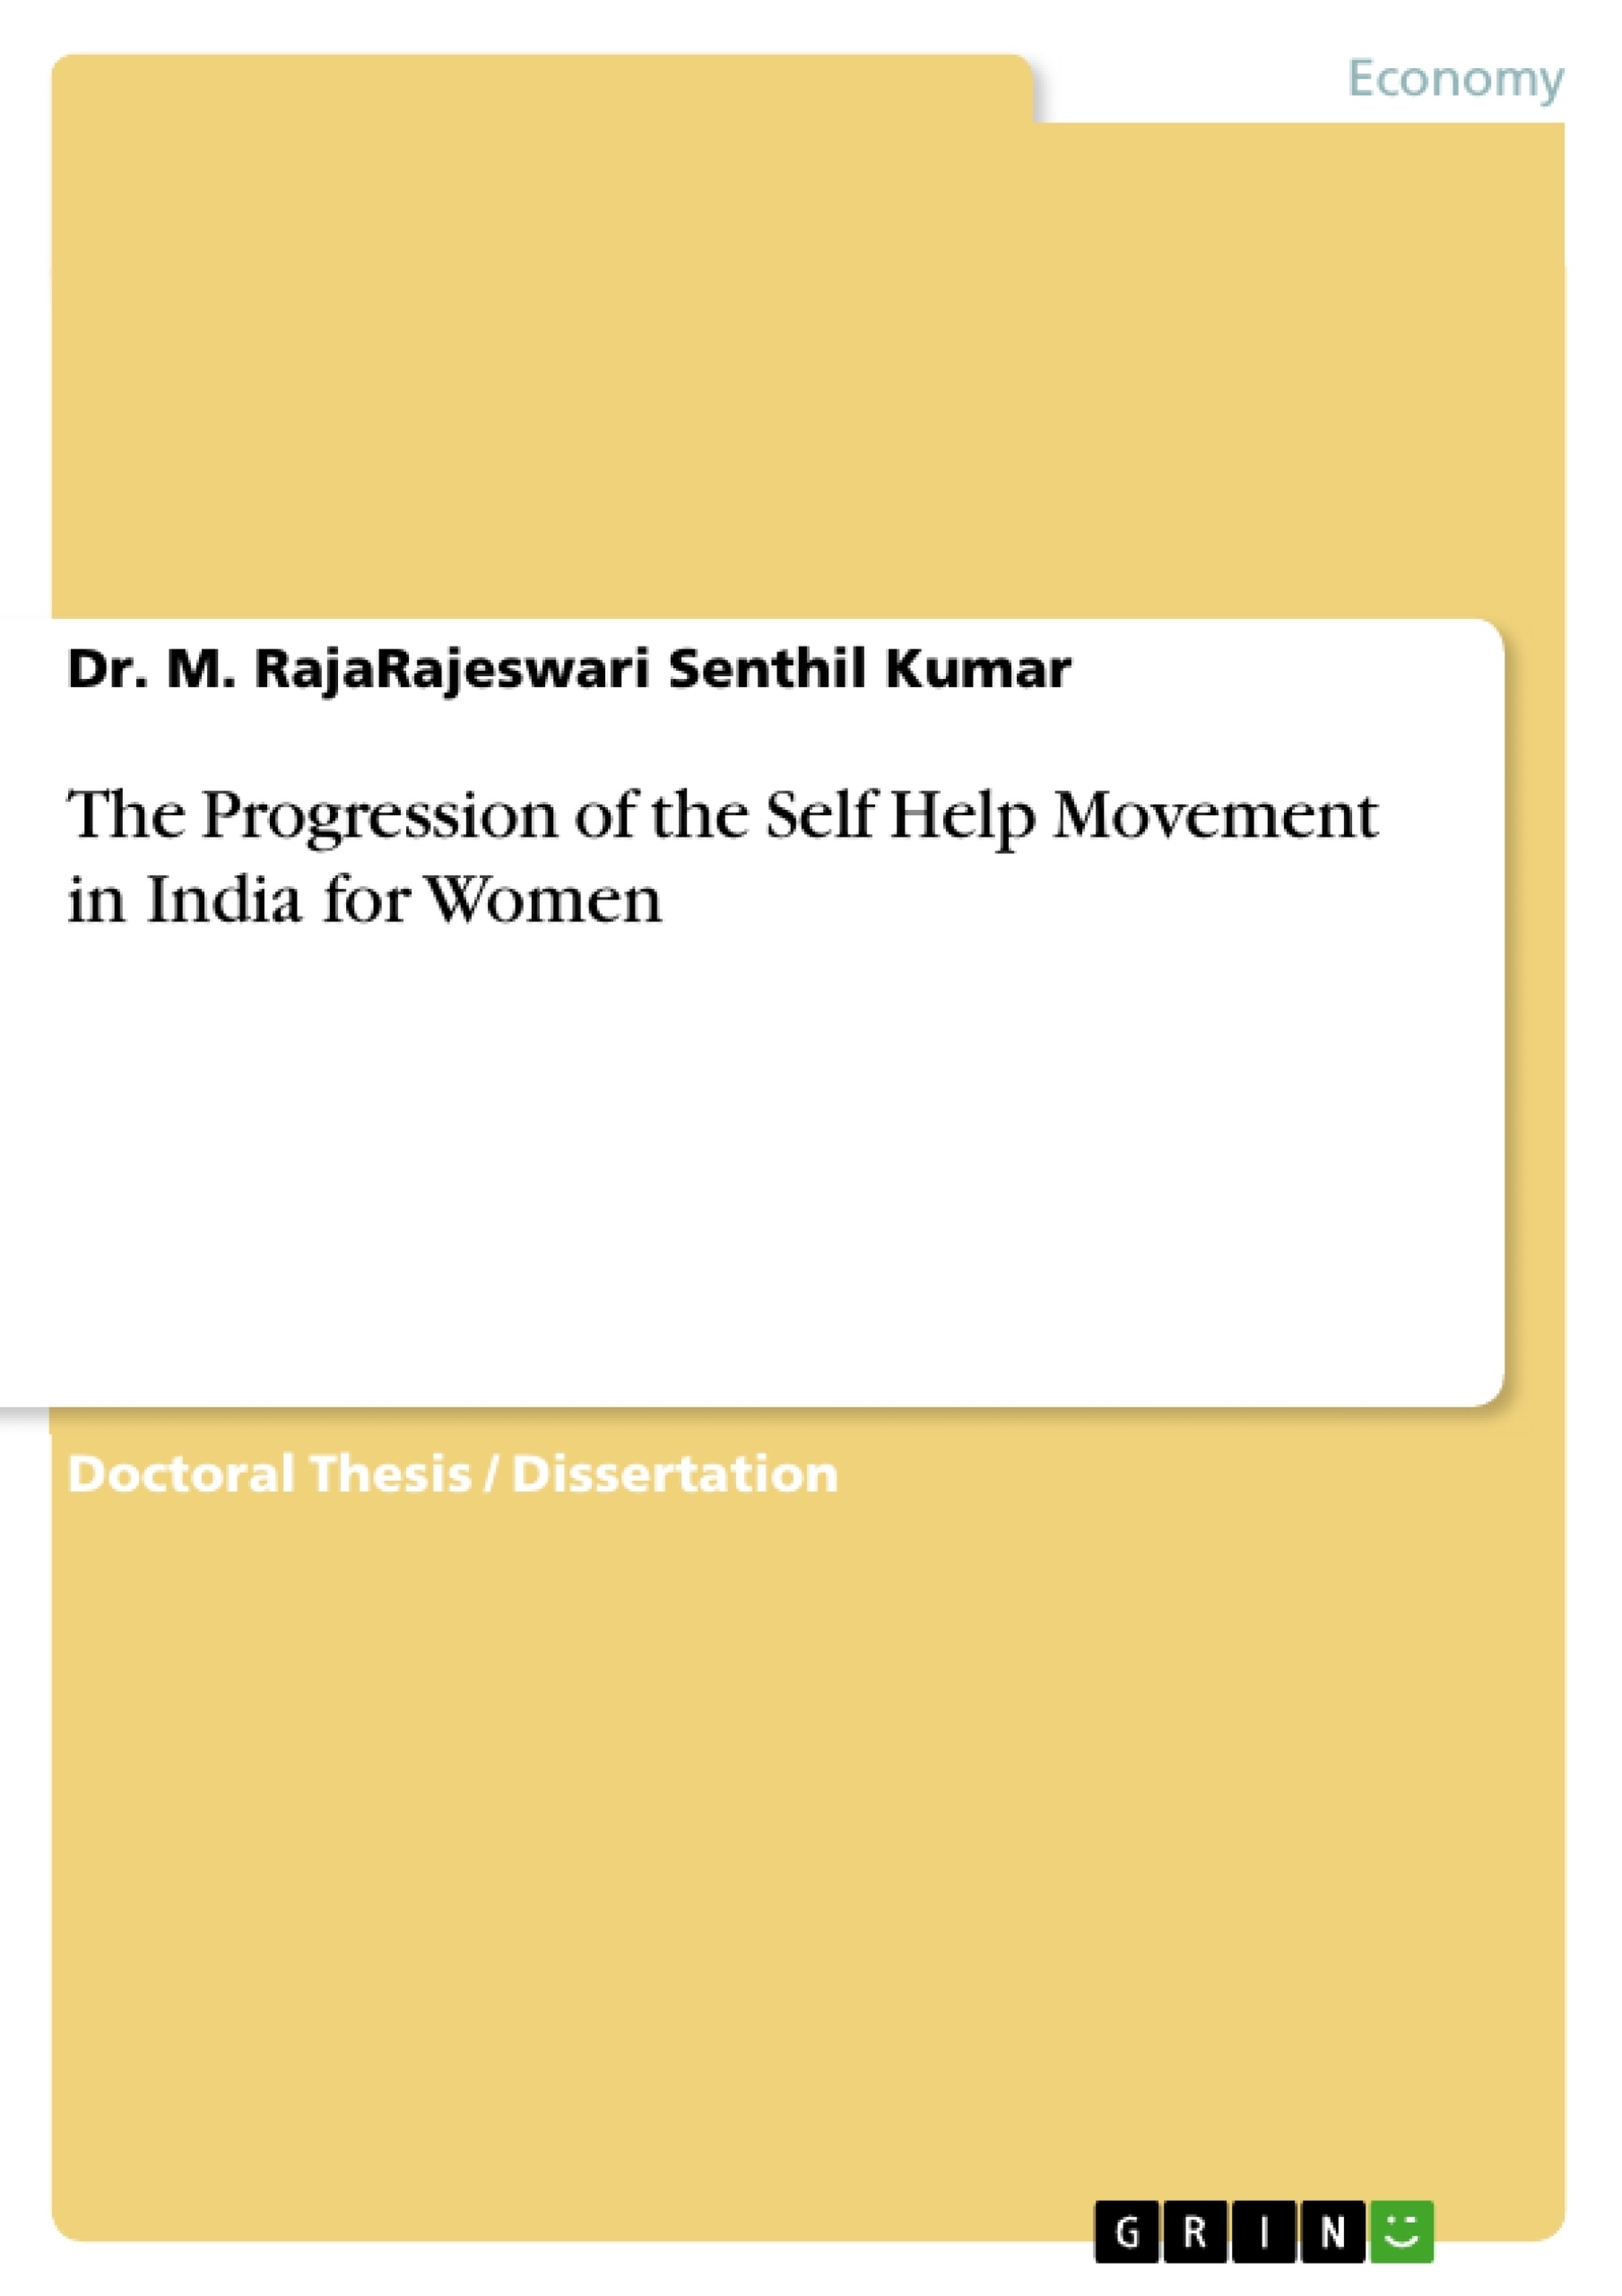 Title: The Progression of the Self Help Movement in India for Women